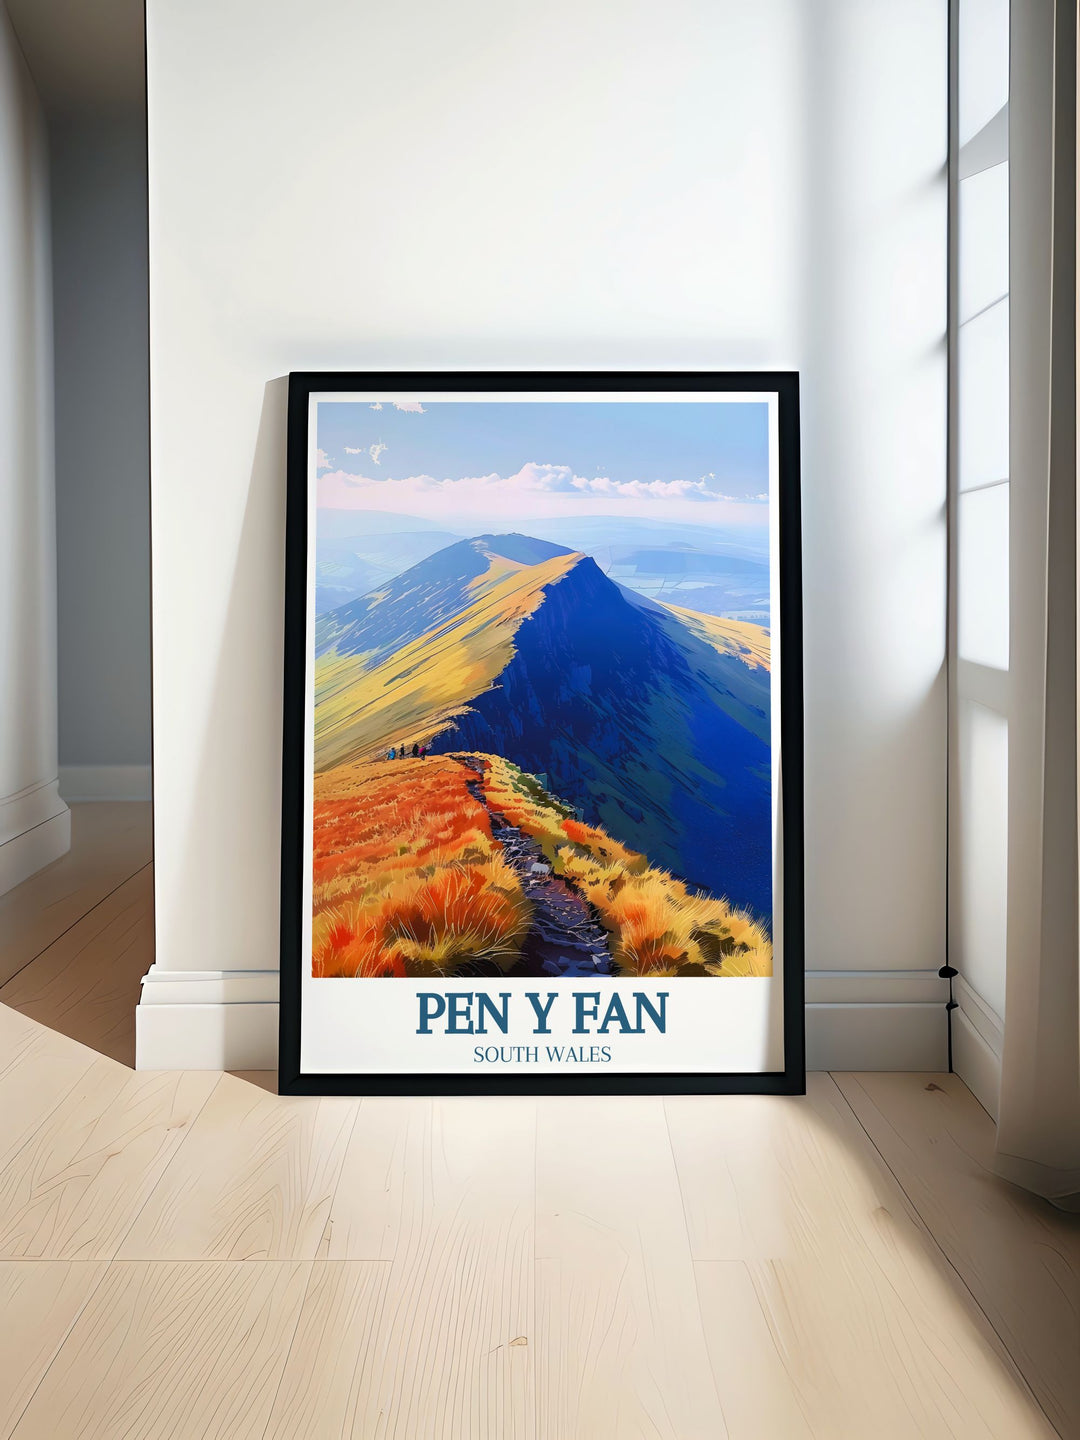 A stunning Pen Y Fan Poster showcasing the breathtaking beauty of the Brecon Beacons in South Wales. Perfect for nature enthusiasts this print captures the majestic Welsh Mountains and adds a touch of serene landscape to any home decor.